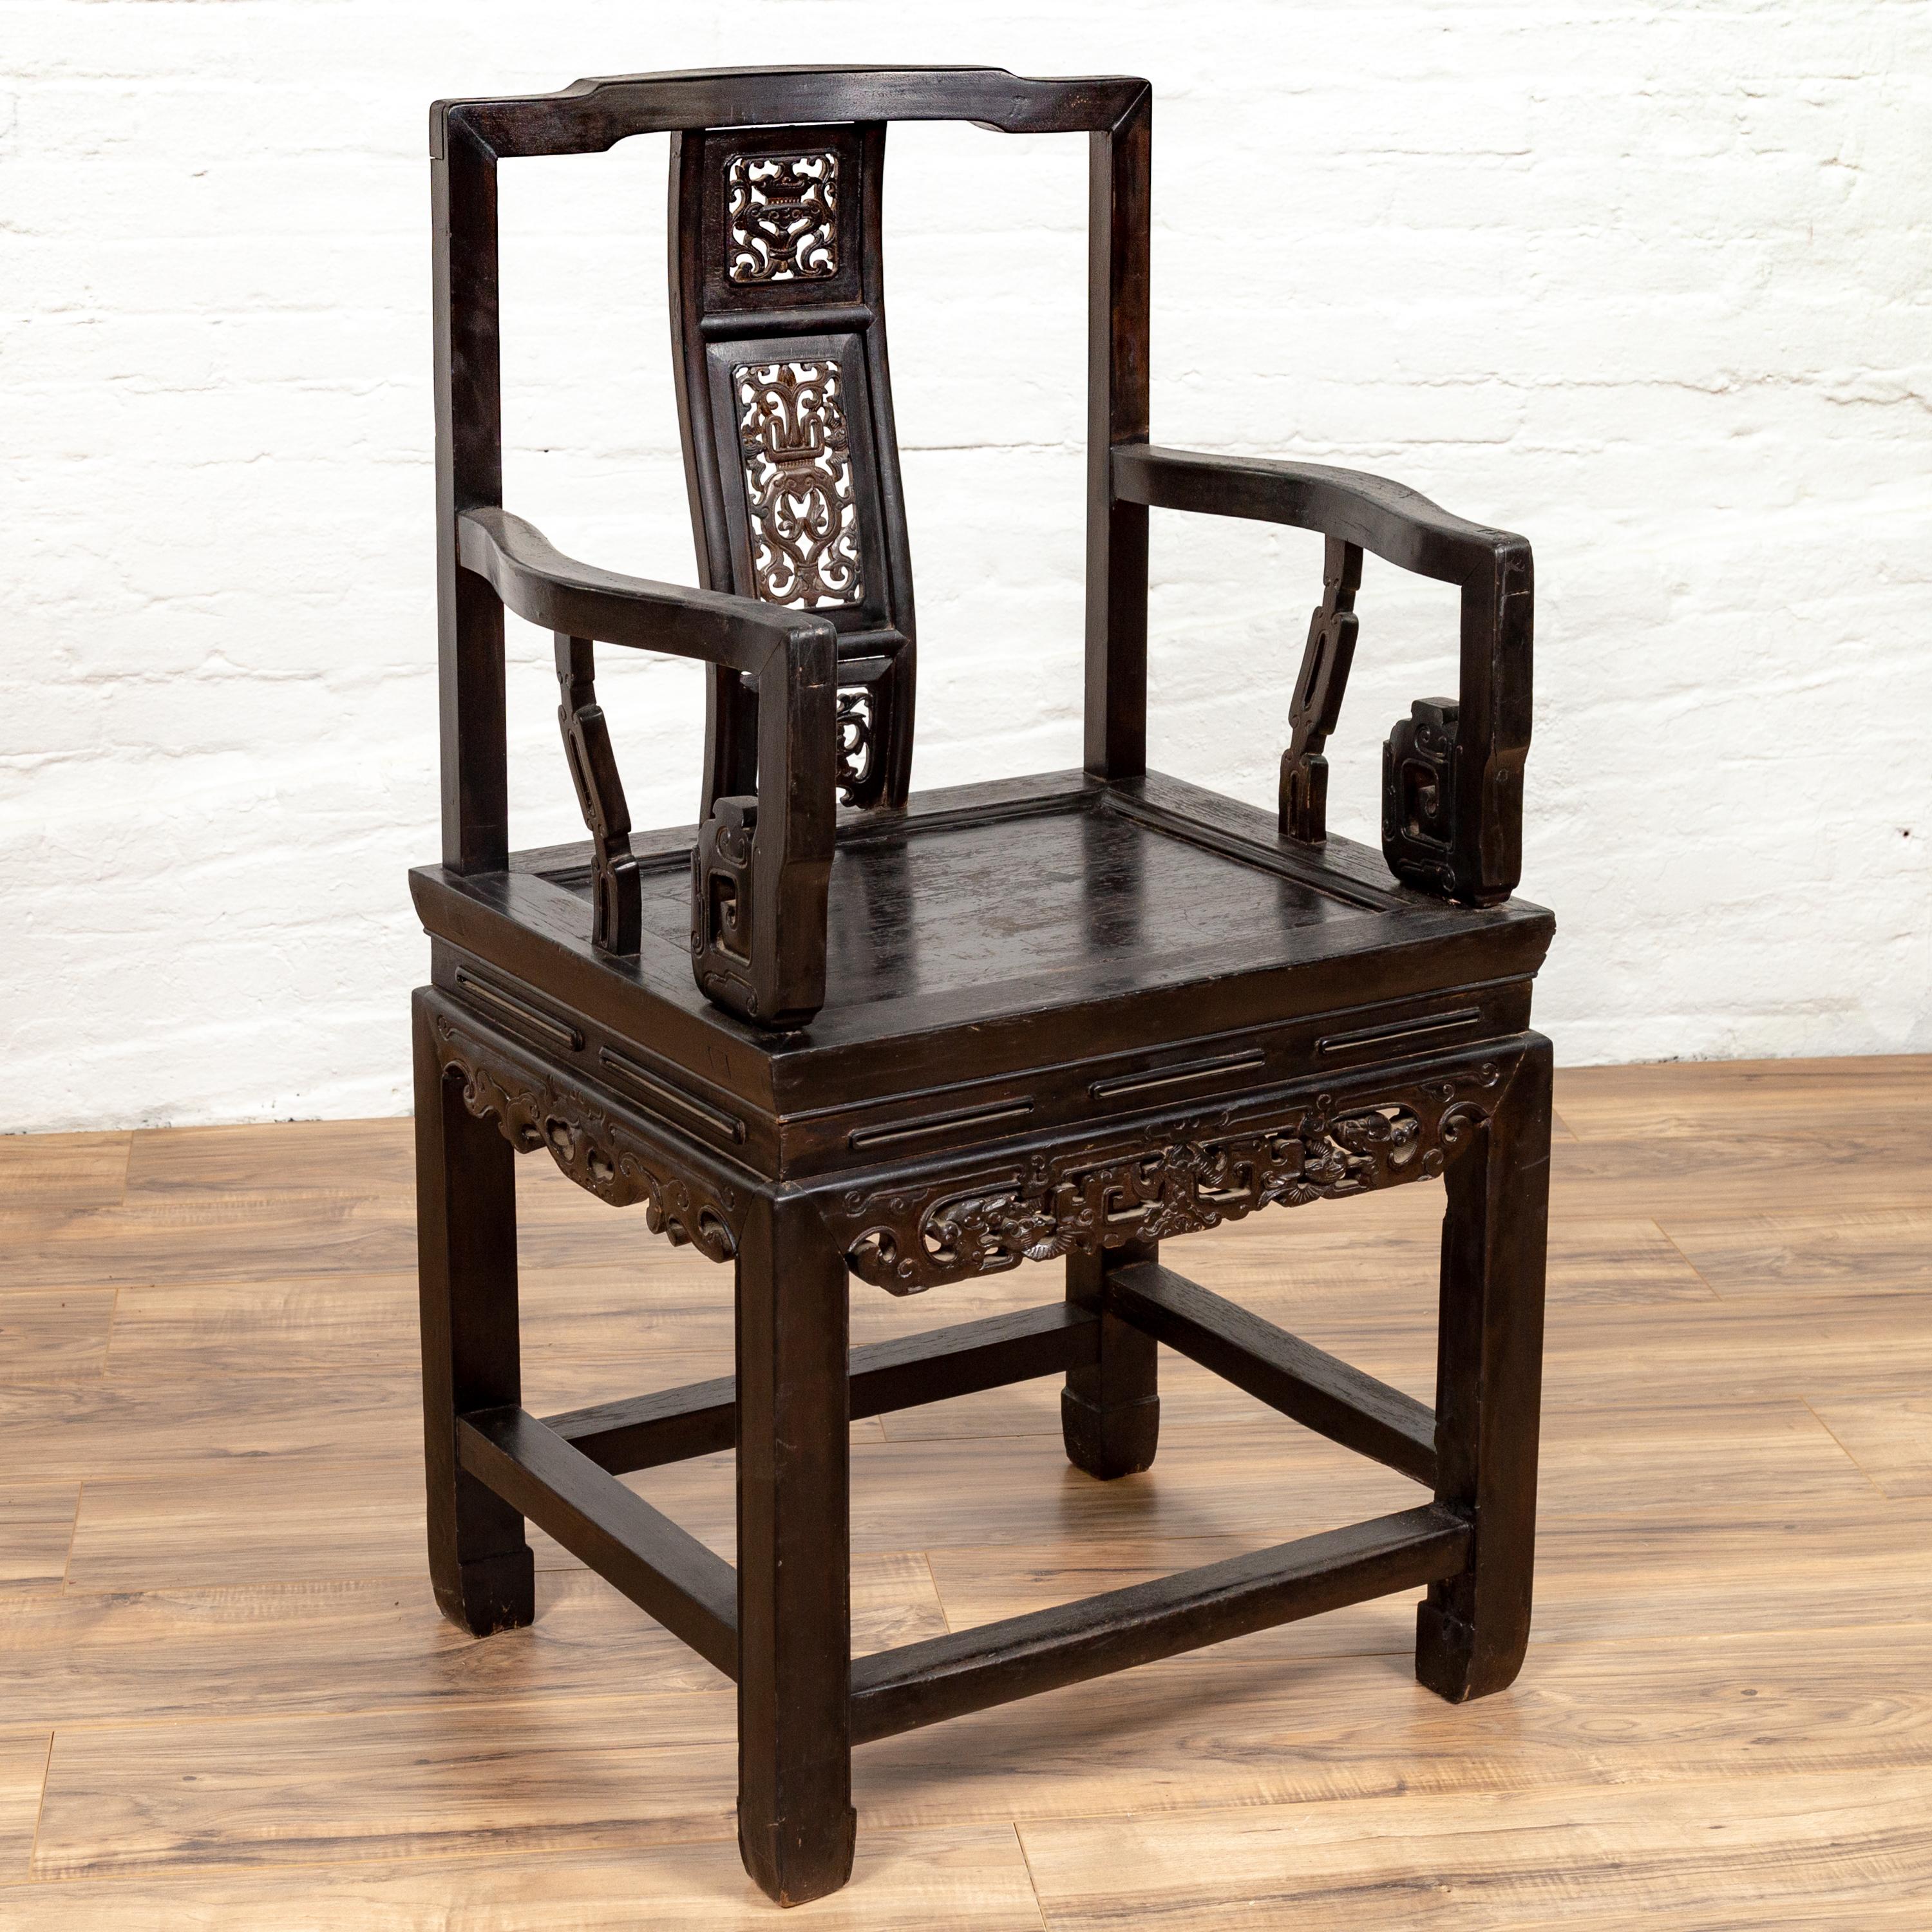 Chinese Wedding Chair with Curvy Pierced Splat, Serpentine Arms and Dark Patina For Sale 4